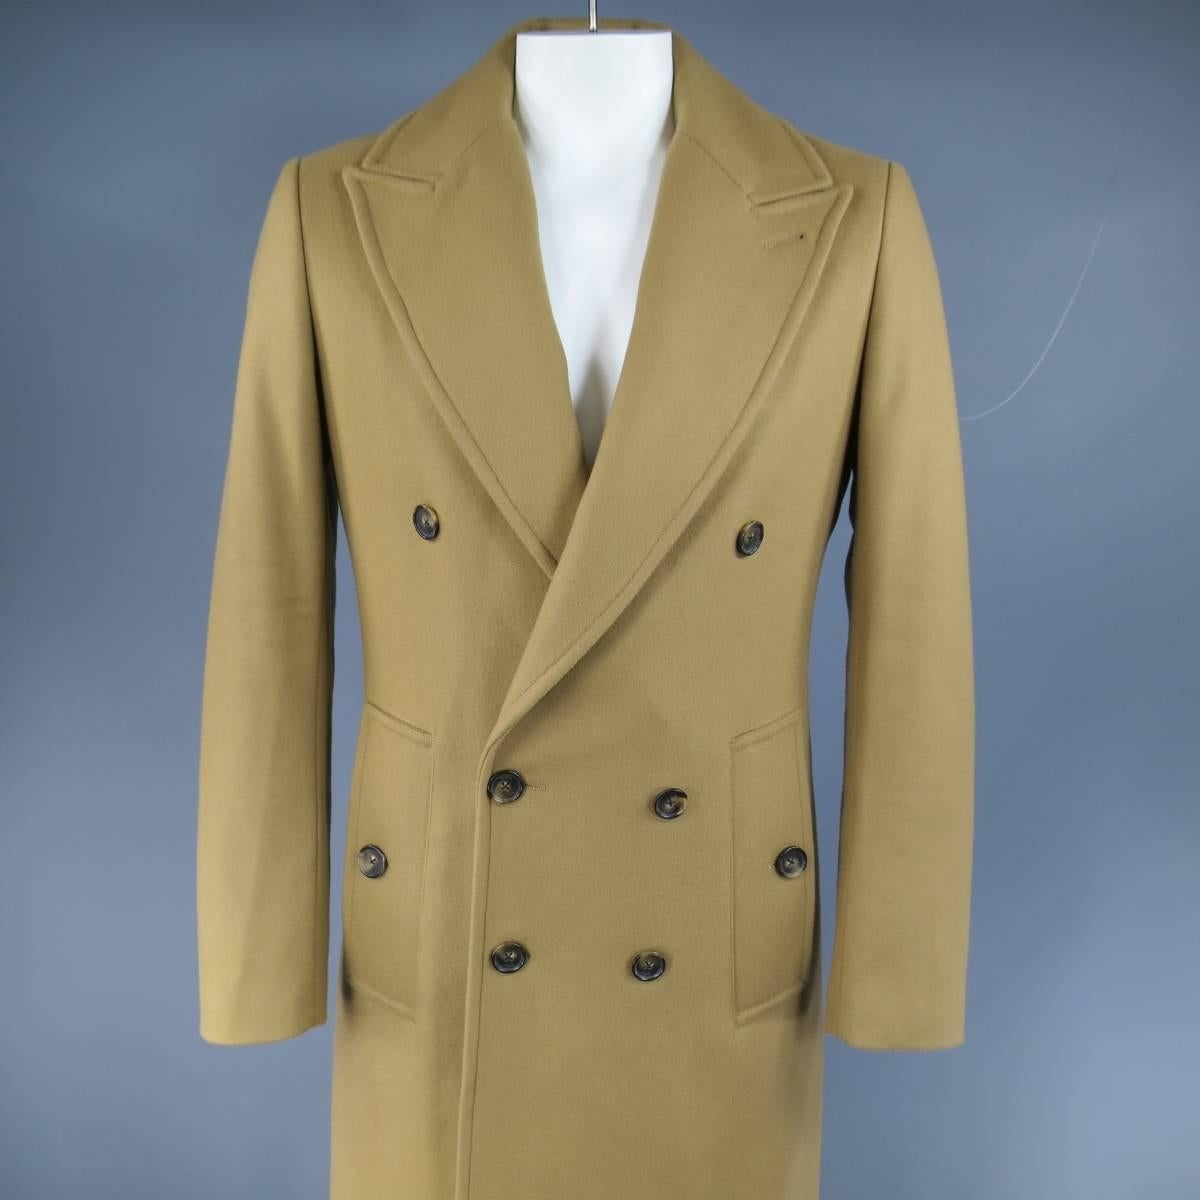 Classic double breasted MICHAEL KORS coat in a tan camel wool blend featuring a peak lapel, double button pockets, and back metal engraved plaque.
 
Excellent Pre-Owned Condition.
Marked: M
 
Measurements:
 
Shoulder: 18 in.
Chest: 44